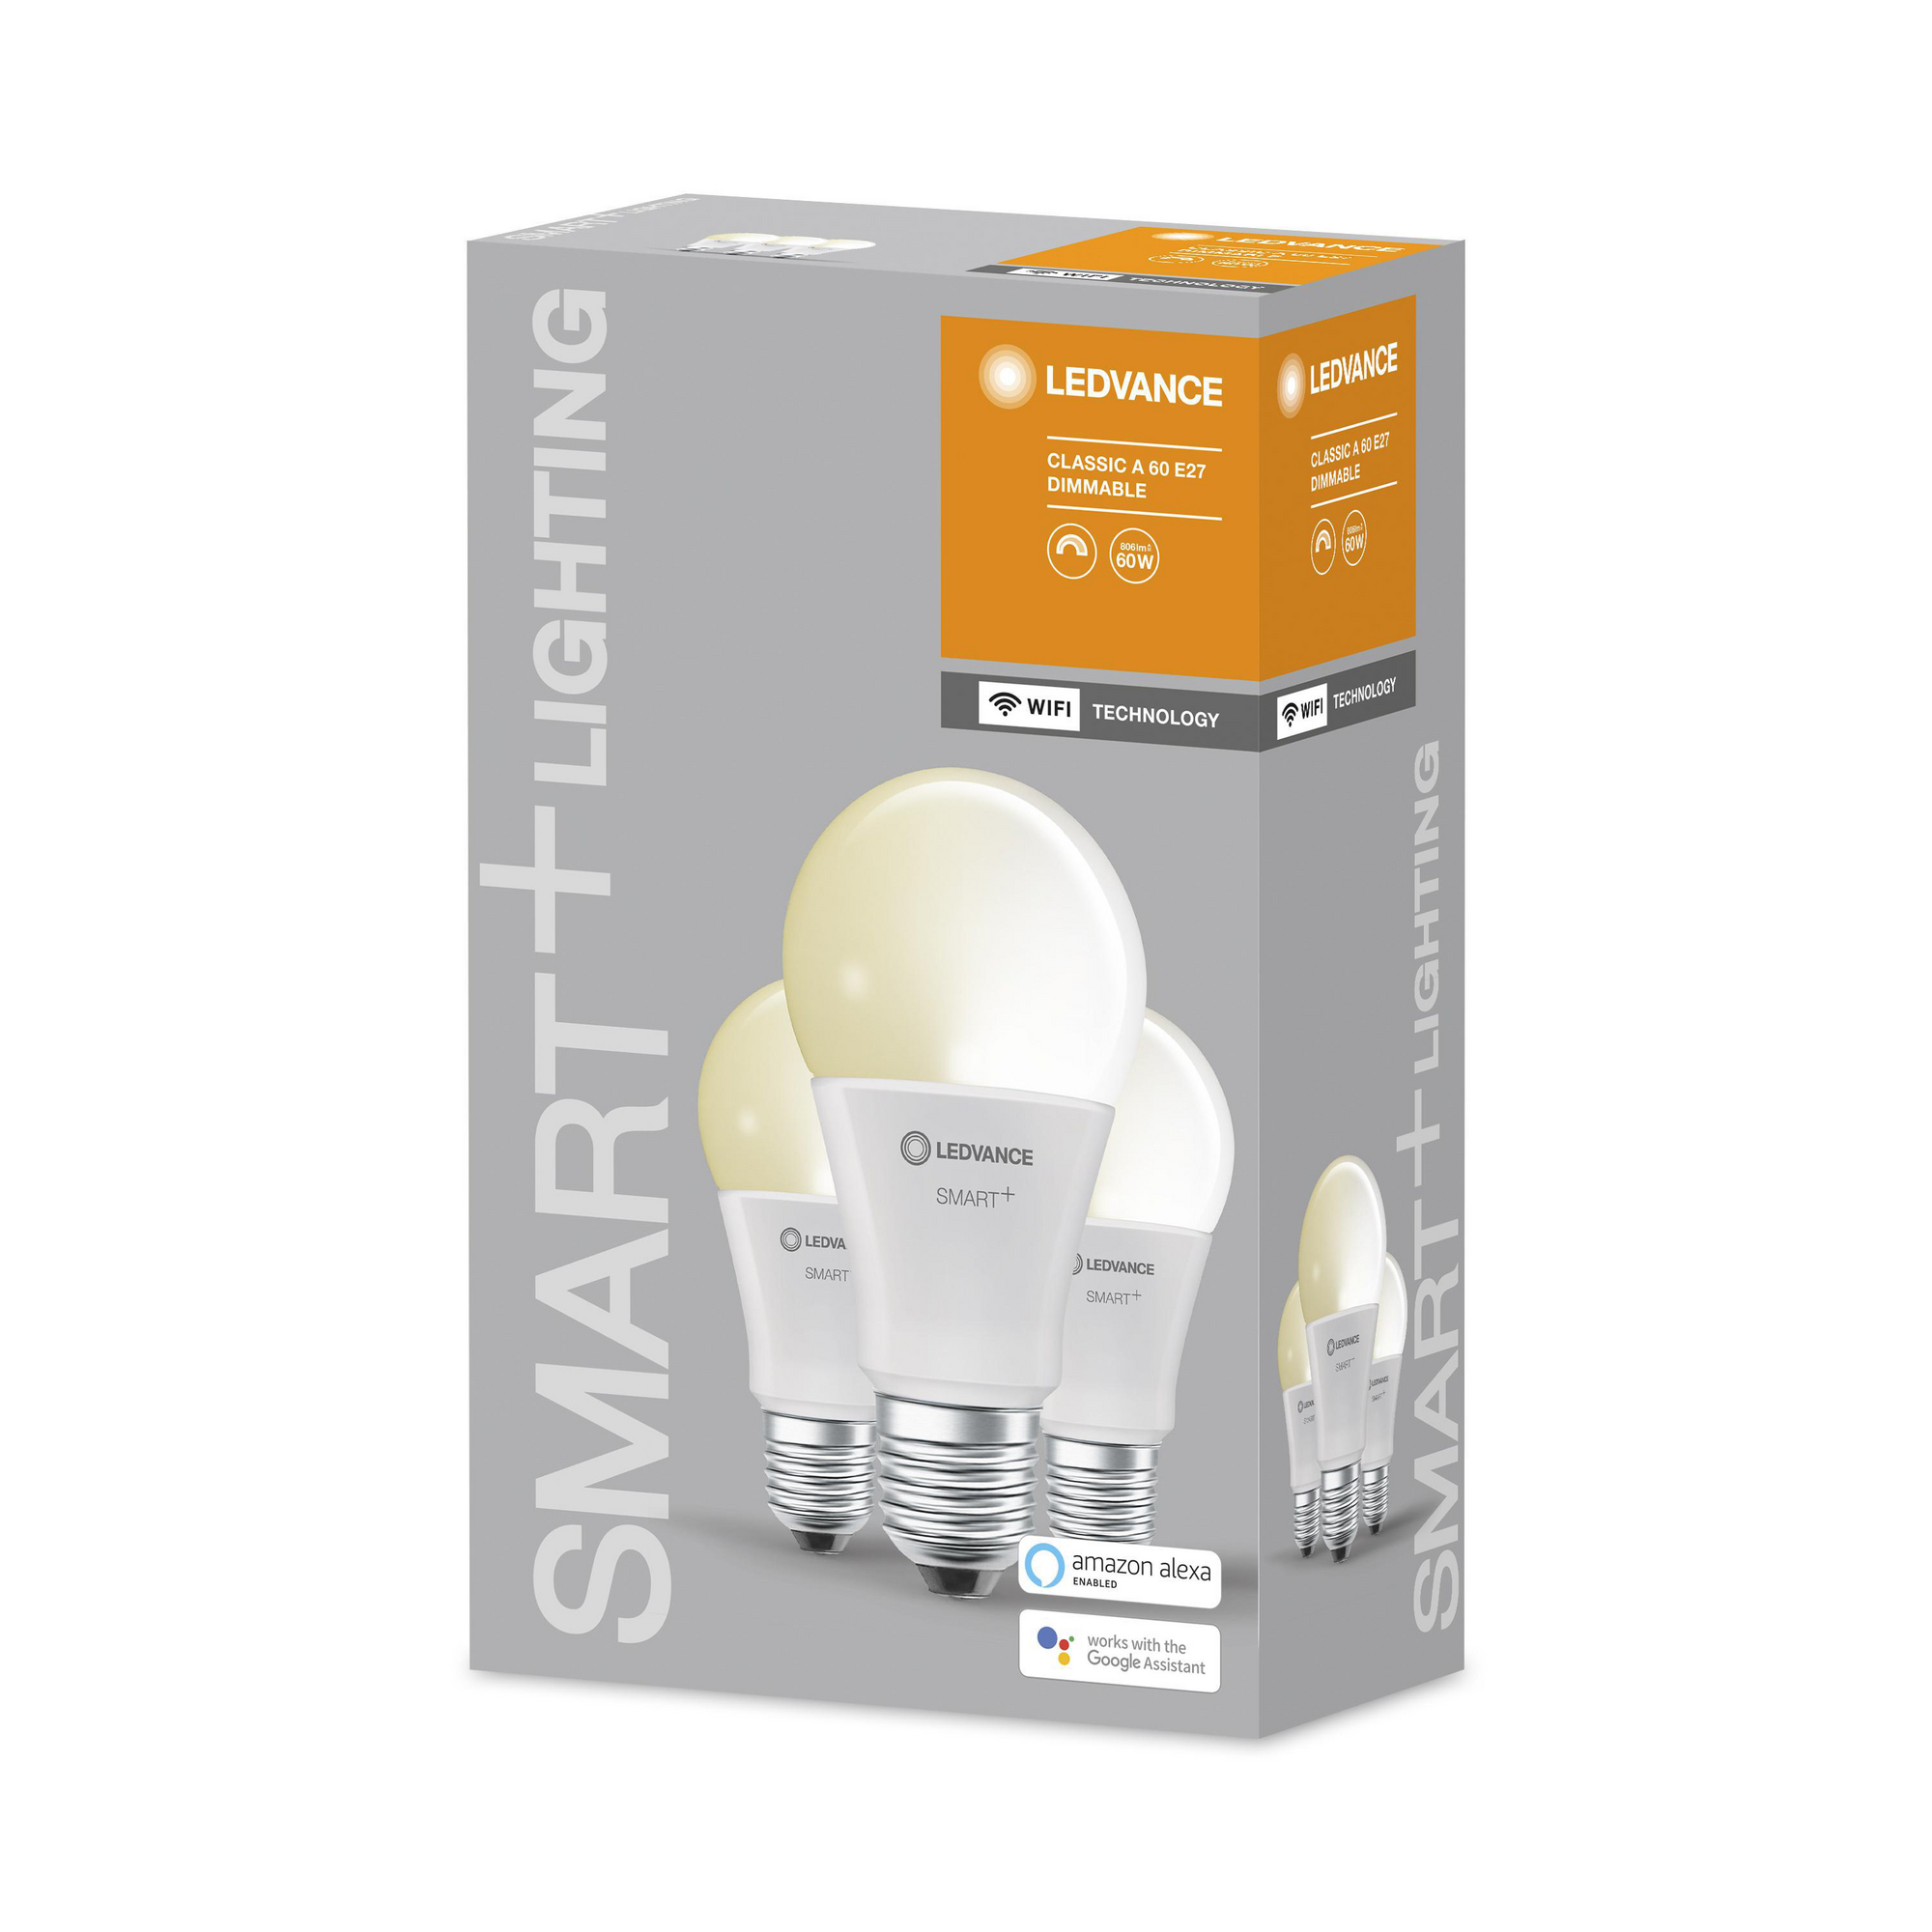 LED-Lampe 'Smart+' 11,5 cm 806 lm 9 W E27 weiß WLAN dimmbar 3 Stk. + product picture